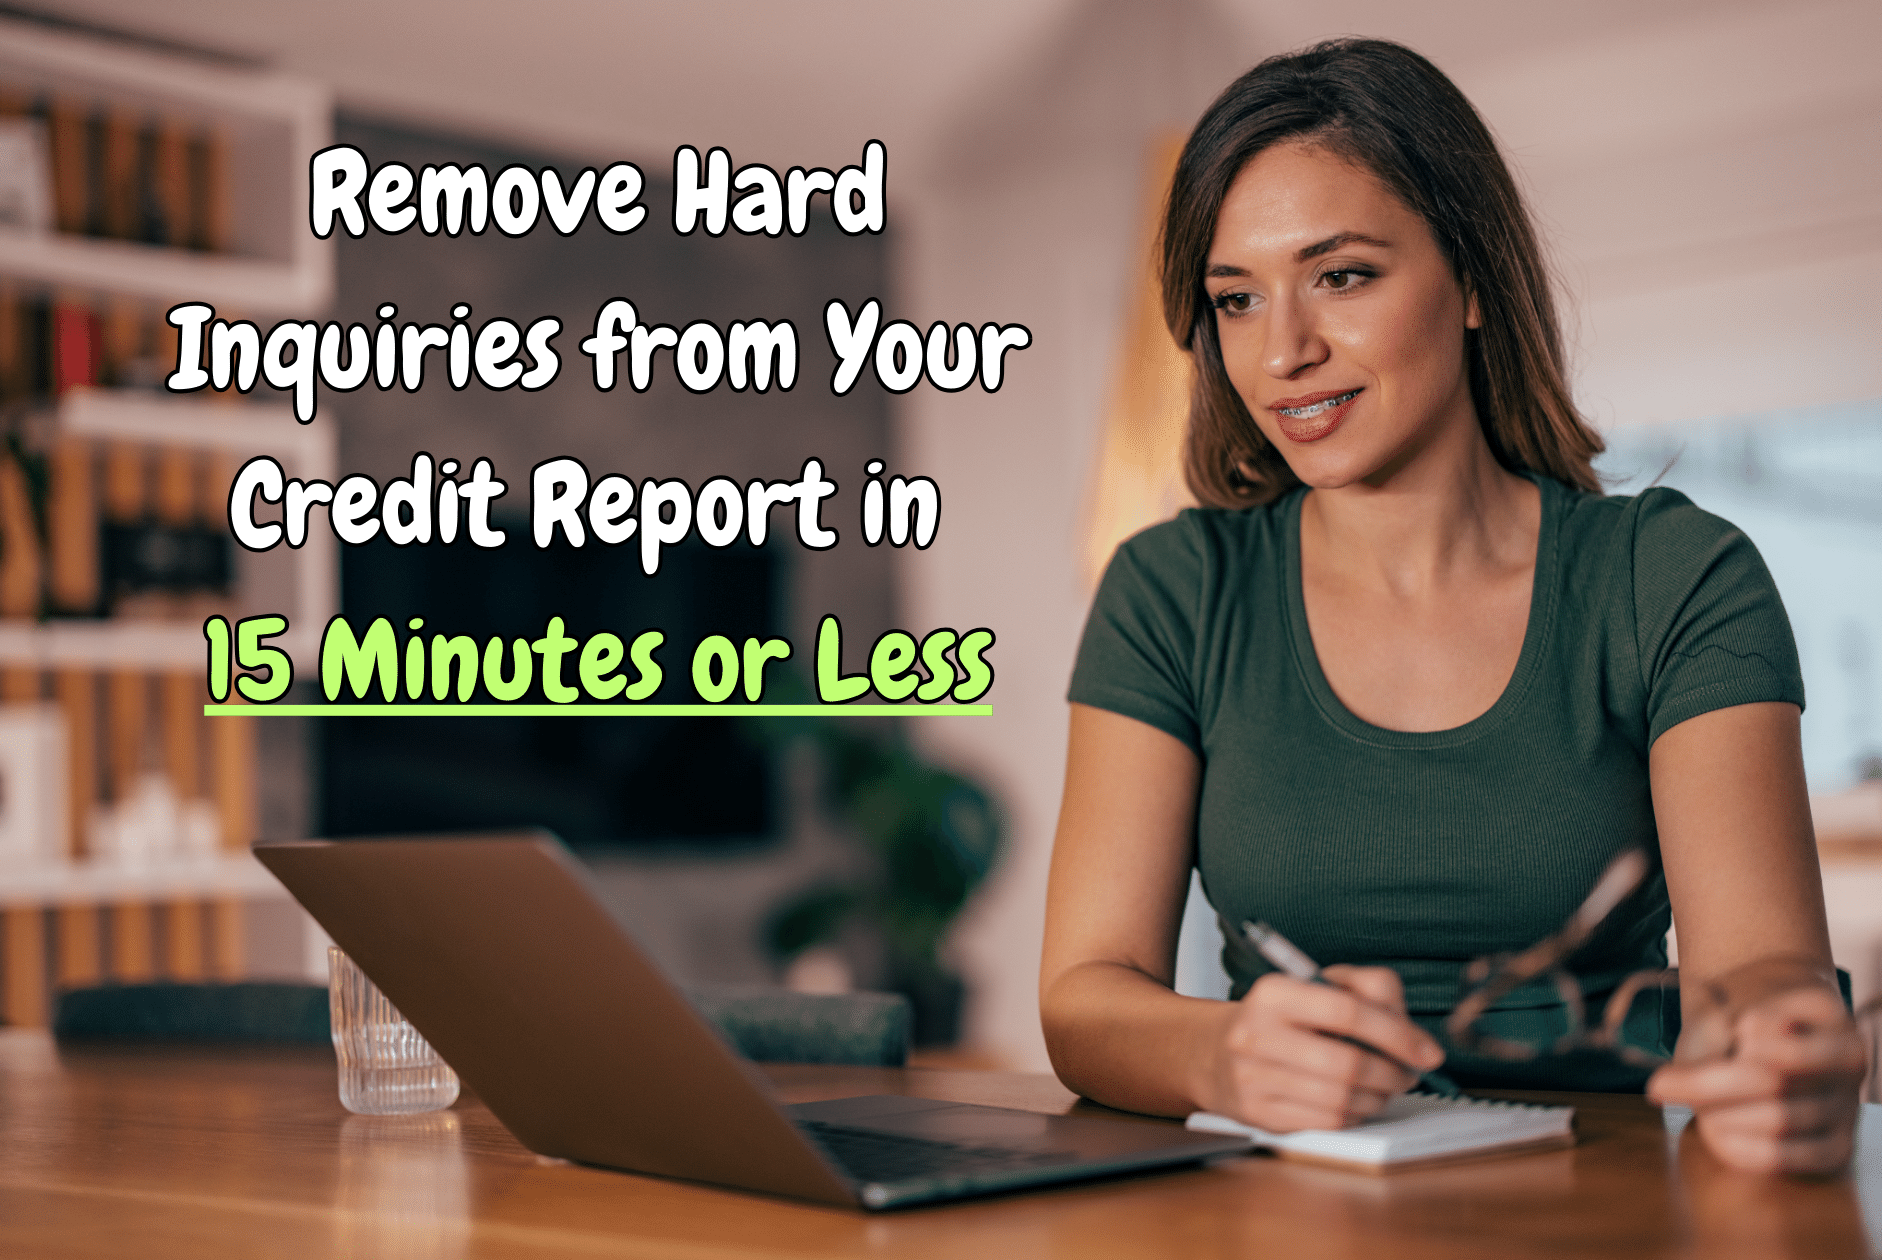 Remove Hard Inquiries from Your Credit Report in 15 Minutes